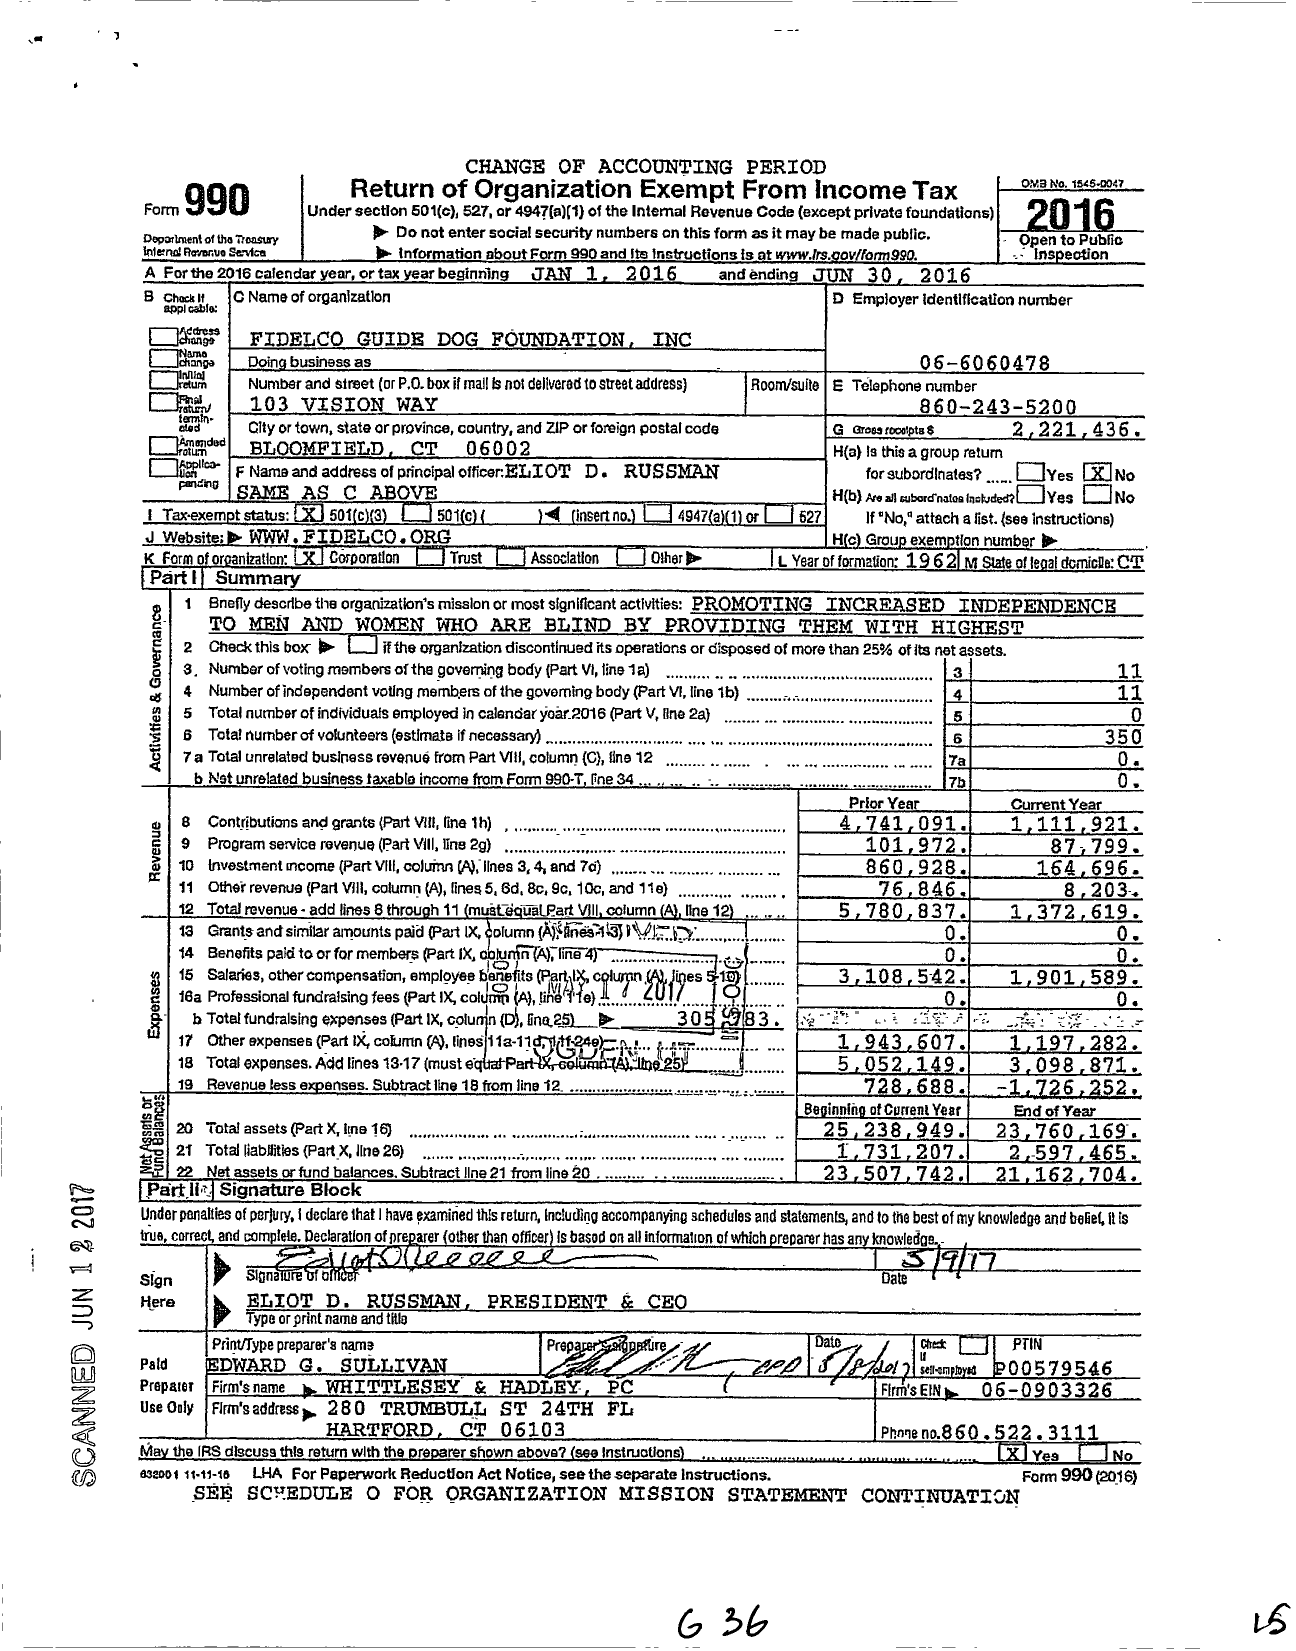 Image of first page of 2015 Form 990 for Fidelco Guide Dog Foundation